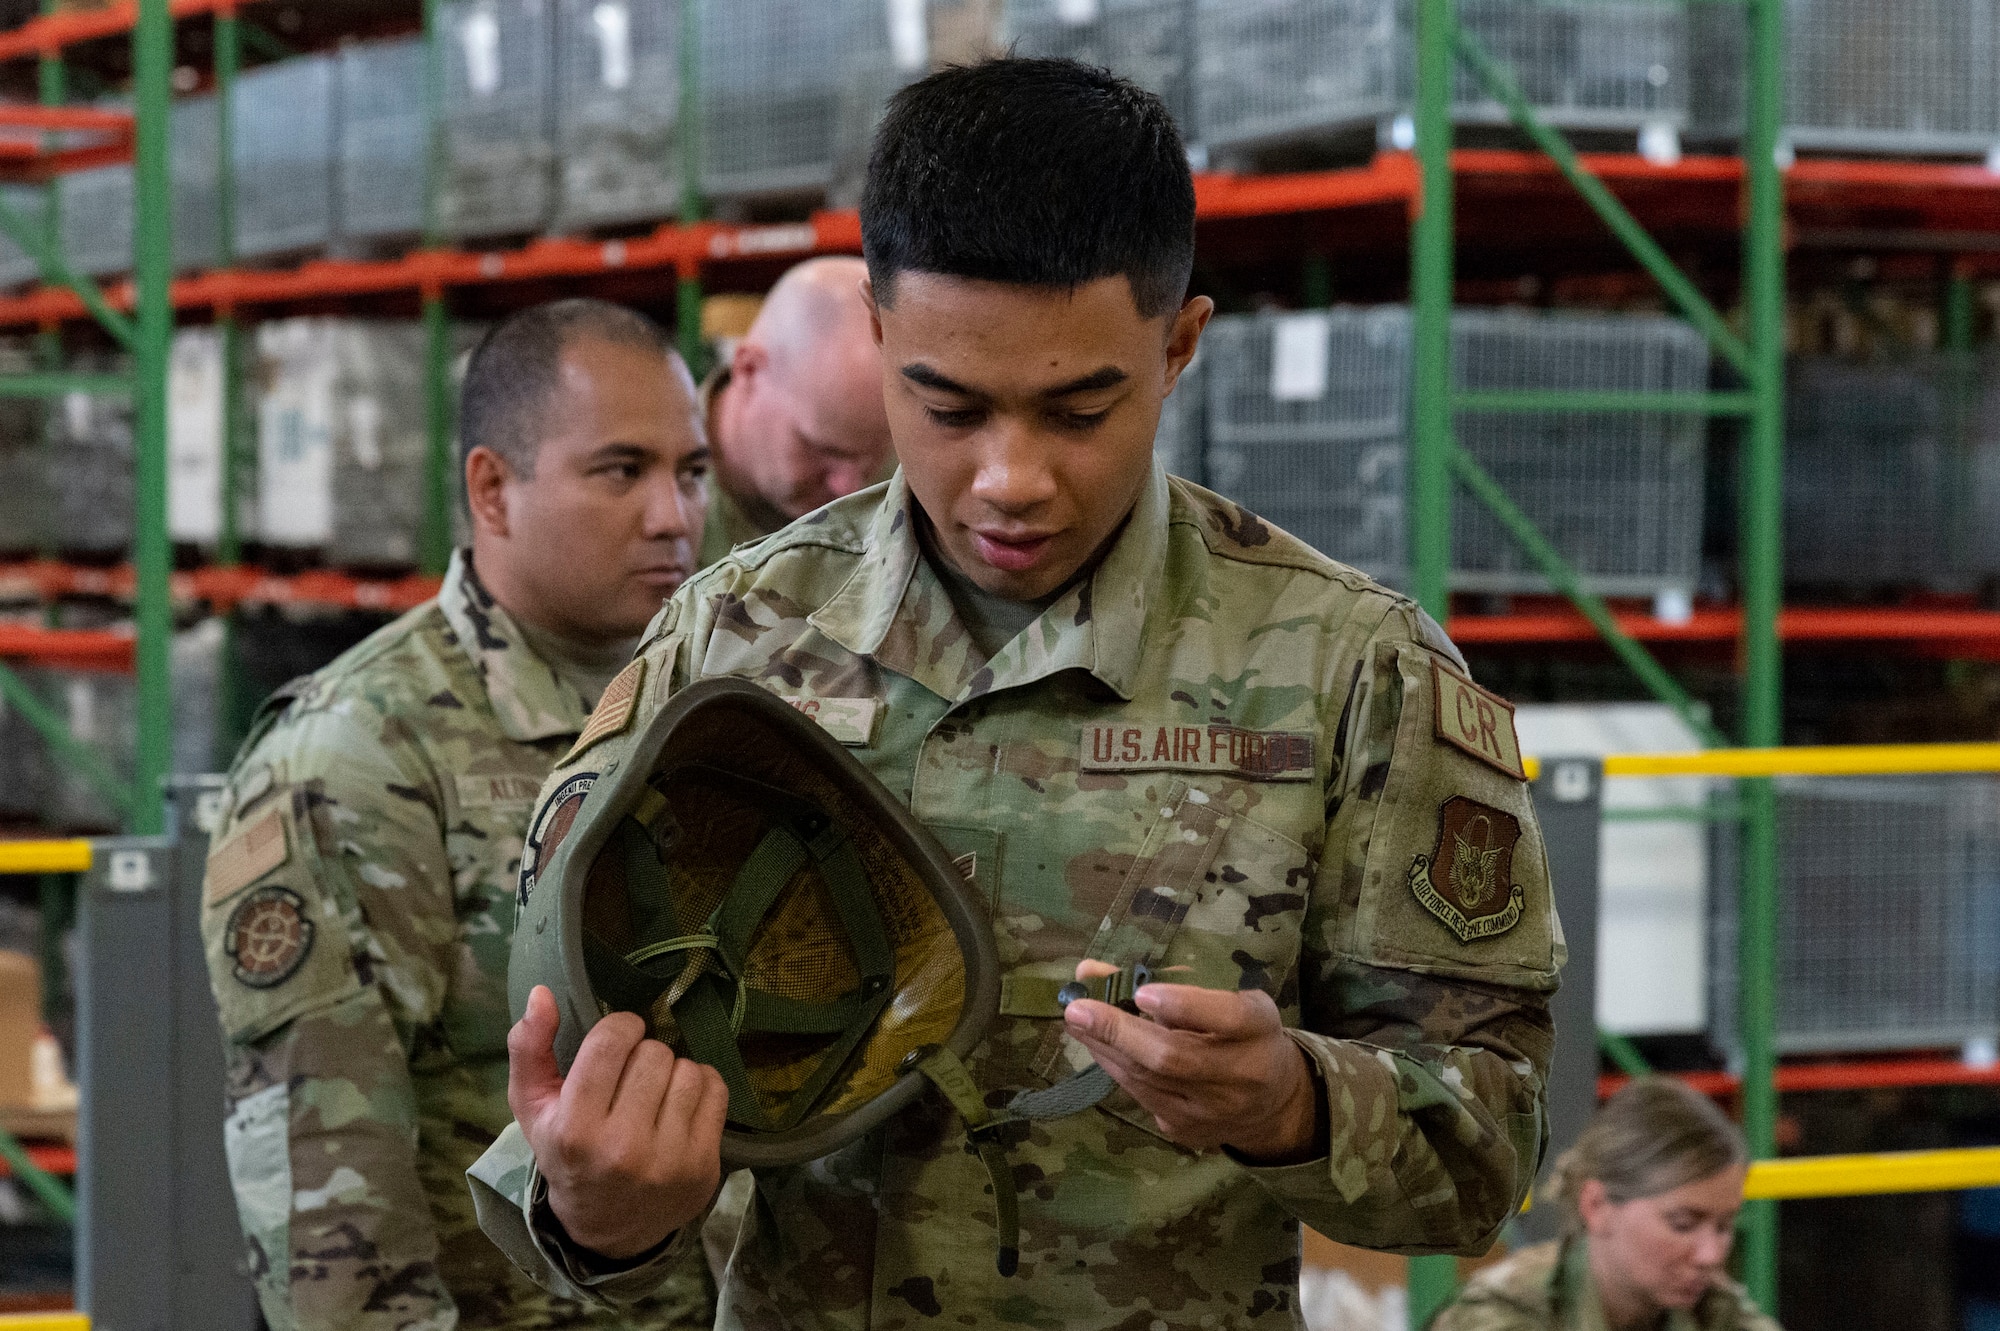 Senior Airman Darian Davis Jr., 512th Contingency Response Squadron command and control journeyman, checks his helmet chin strap as he processes through the personnel deployment function line during Liberty Eagle Readiness Exercise 2022 at Dover Air Force Base, Delaware, July 11, 2022. The 436th and 512th Airlift Wings tested their ability to generate, employ and sustain airpower across the world in a simulated contested and degraded operational environment. (U.S. Air Force photo by Roland Balik)